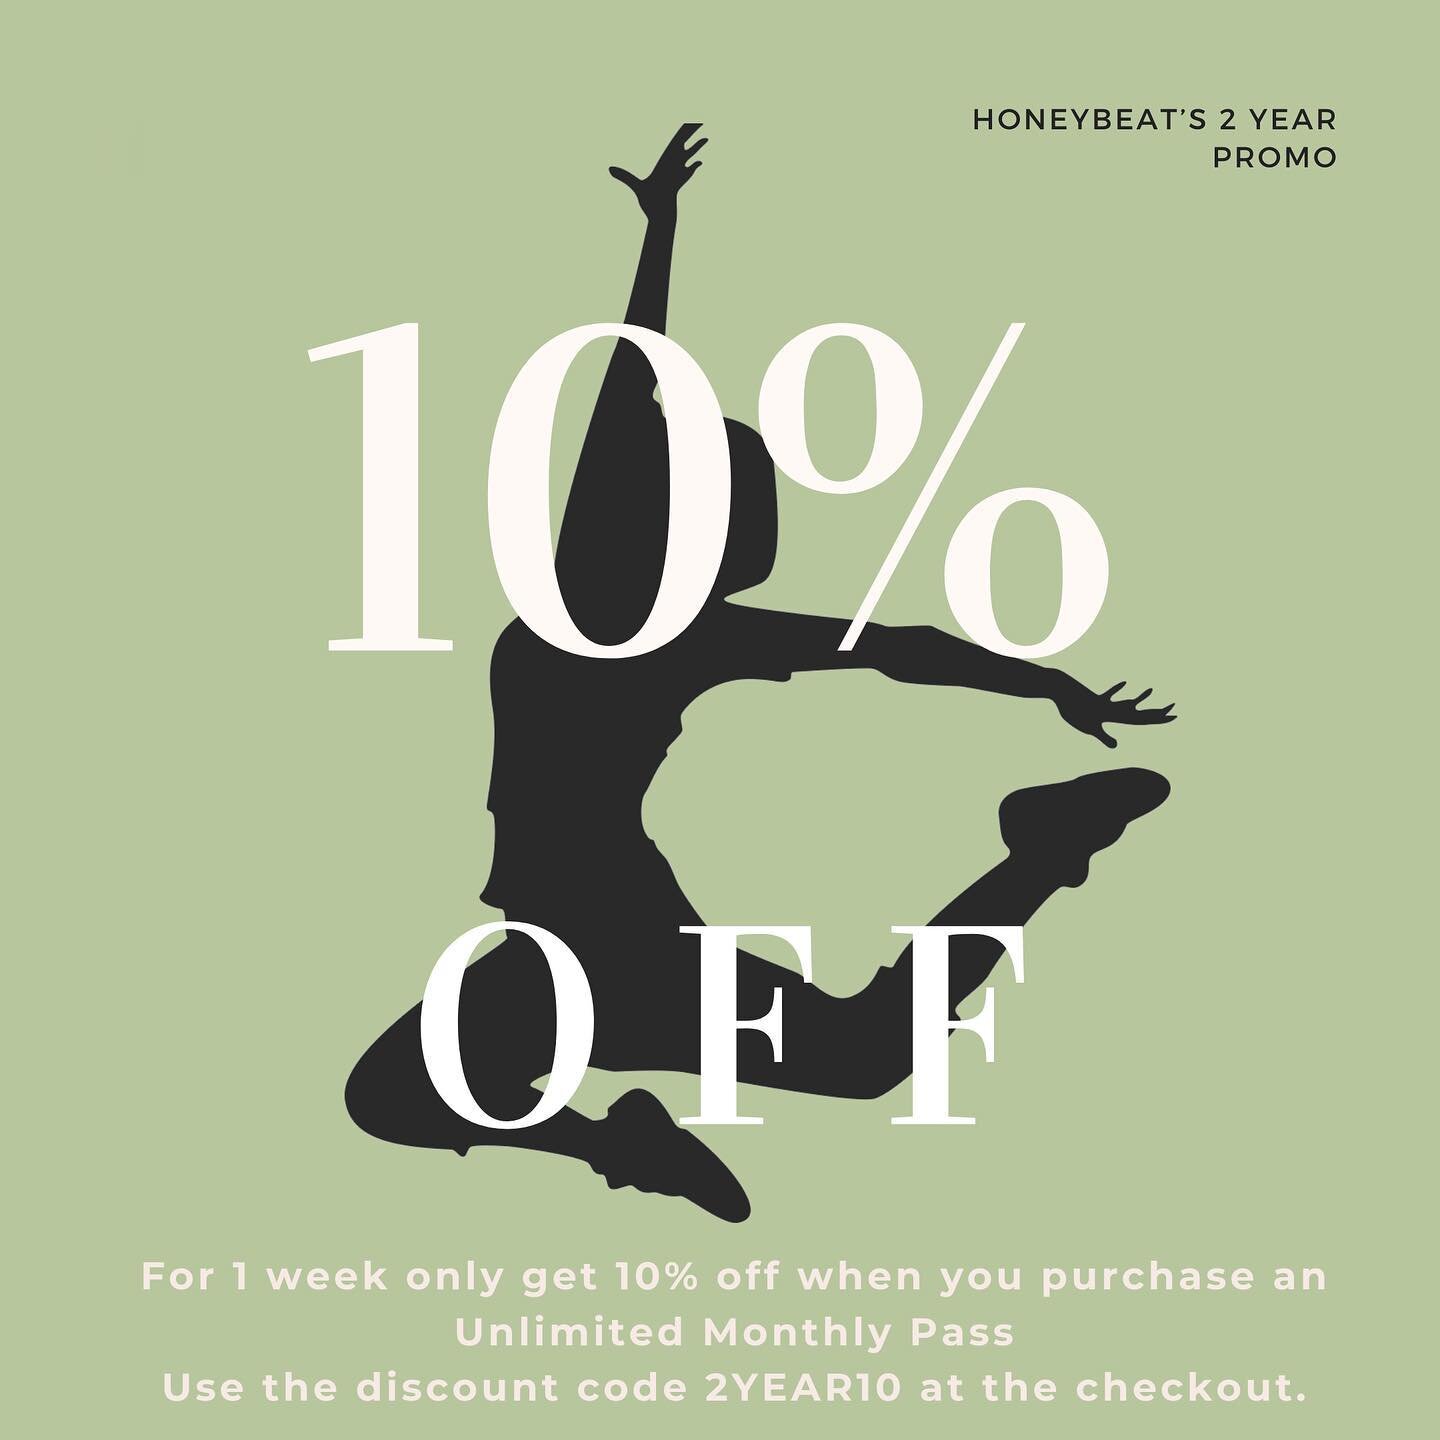 TODAY WE CELEBRATE 2 years of HoneyBEAT Dance and Fitness!! 🎉🎉🎉

So we are offering 10% off for 1 WEEK ONLY on Unlimited Monthly Passes. 
That&rsquo;s 32 classes for the price of &pound;18.00! 

Visit our website to buy your unlimited monthly pass